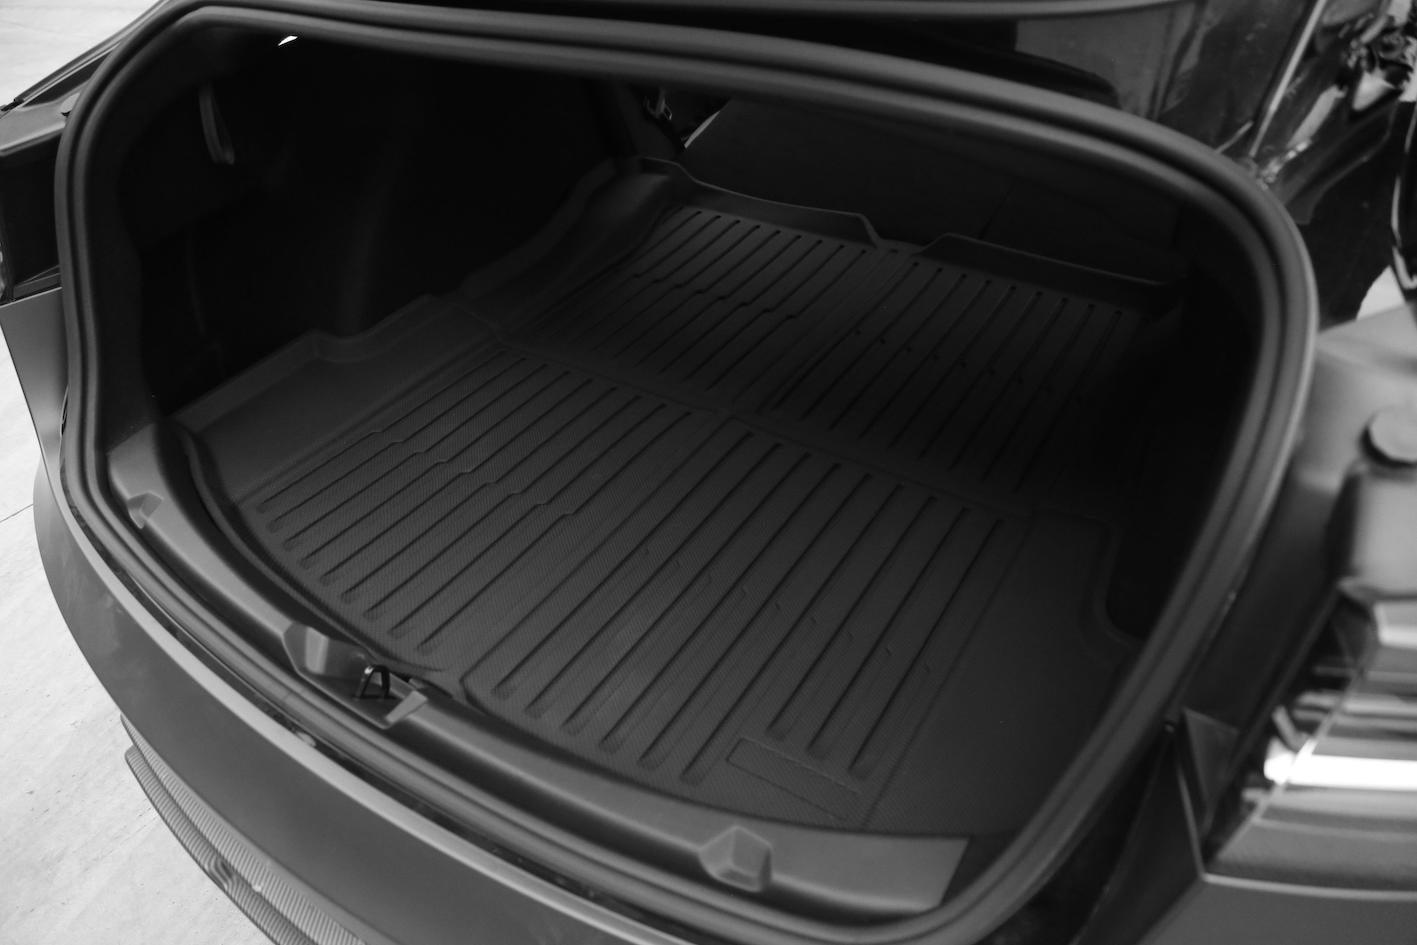 Boot Mat For Model 3 - TESDADDY